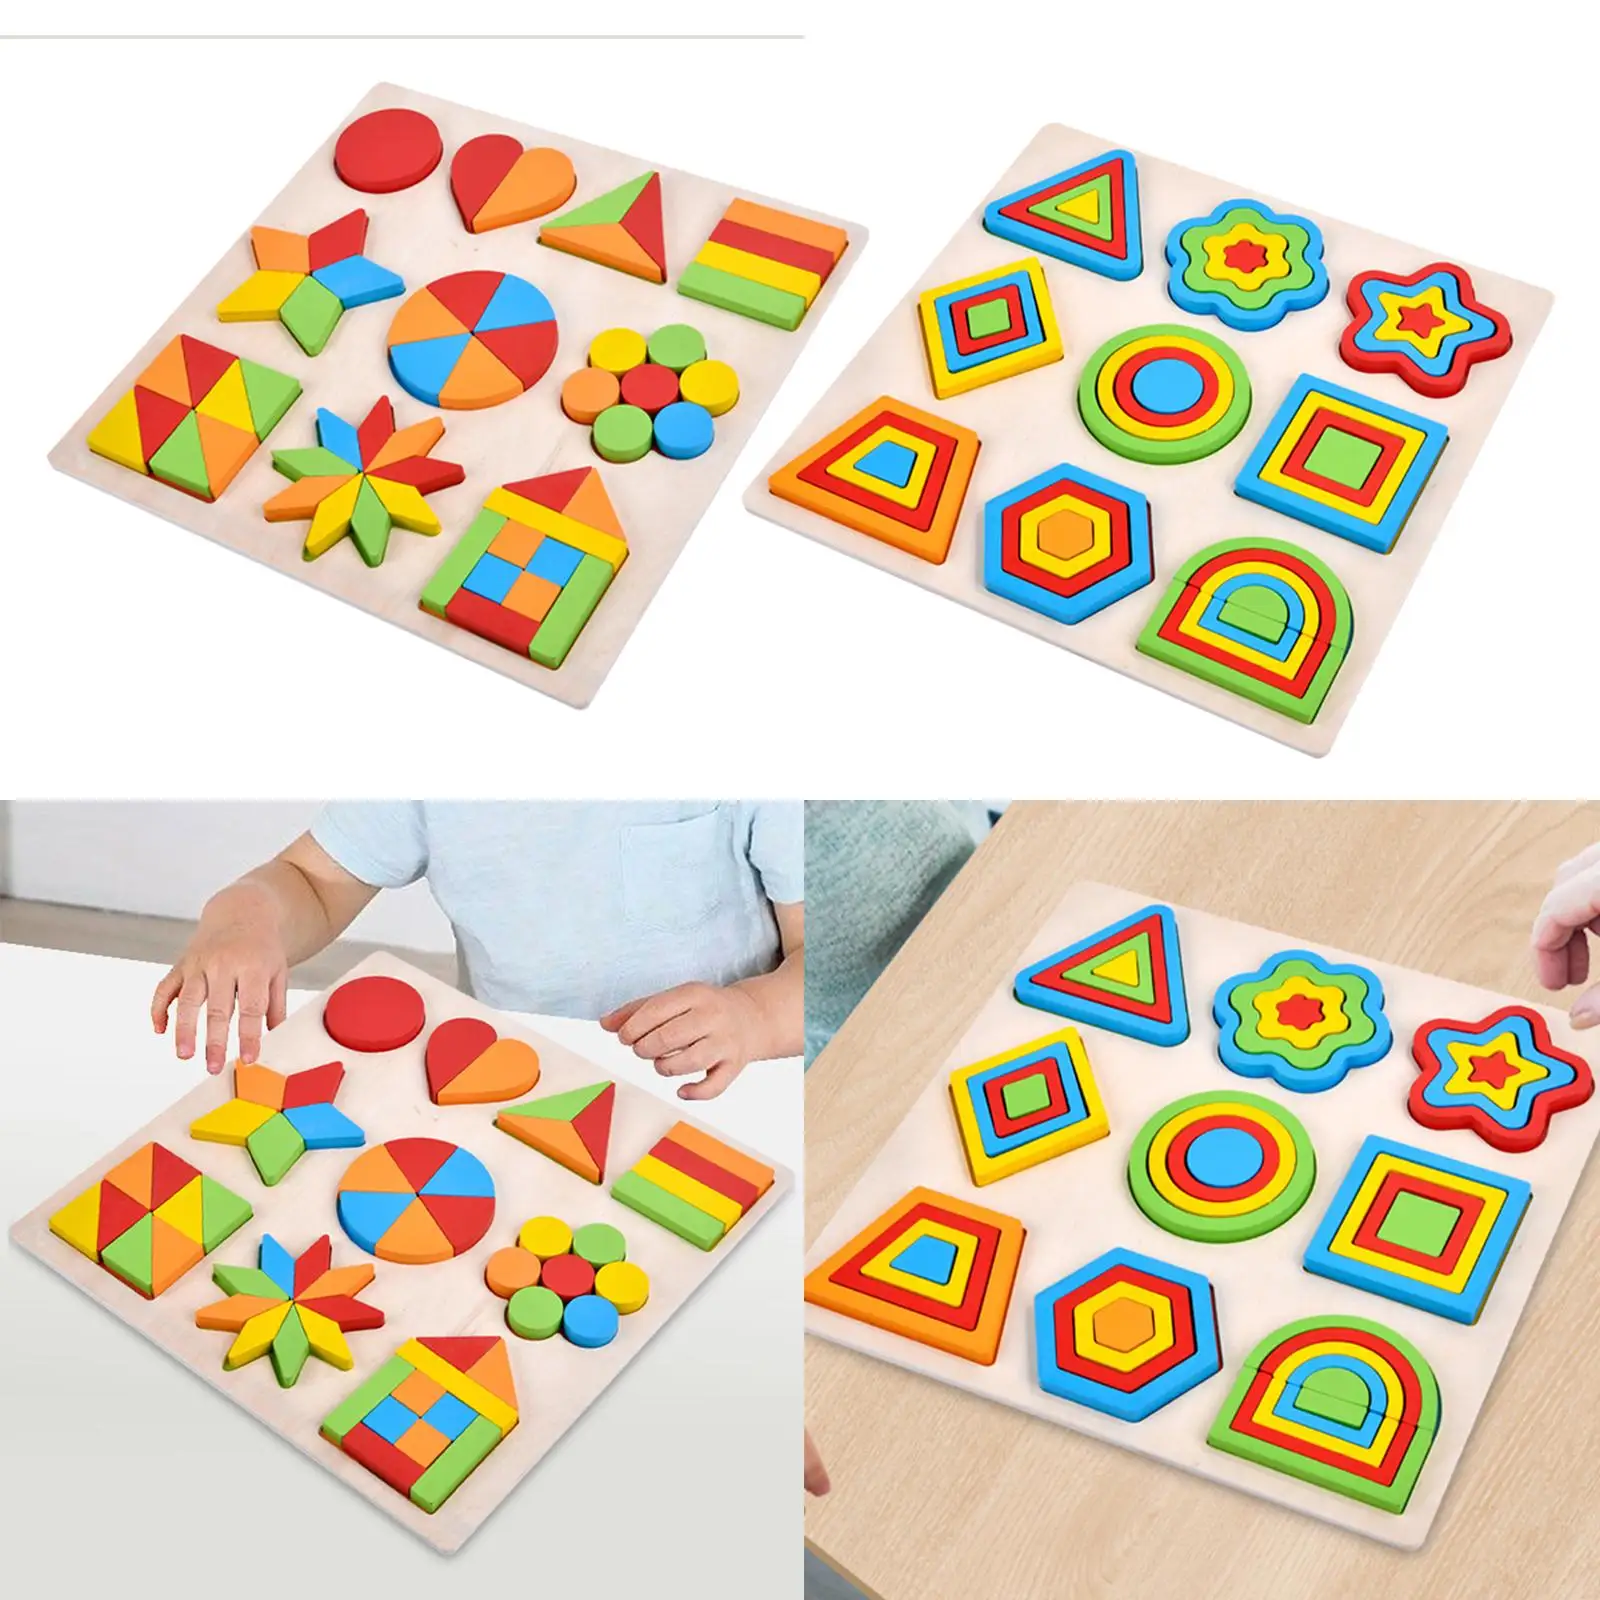 Wooden Puzzle Graphic Cognition Teaching Aids Early Educational Shape Sorting Puzzle for Girls Toddlers Children Gift